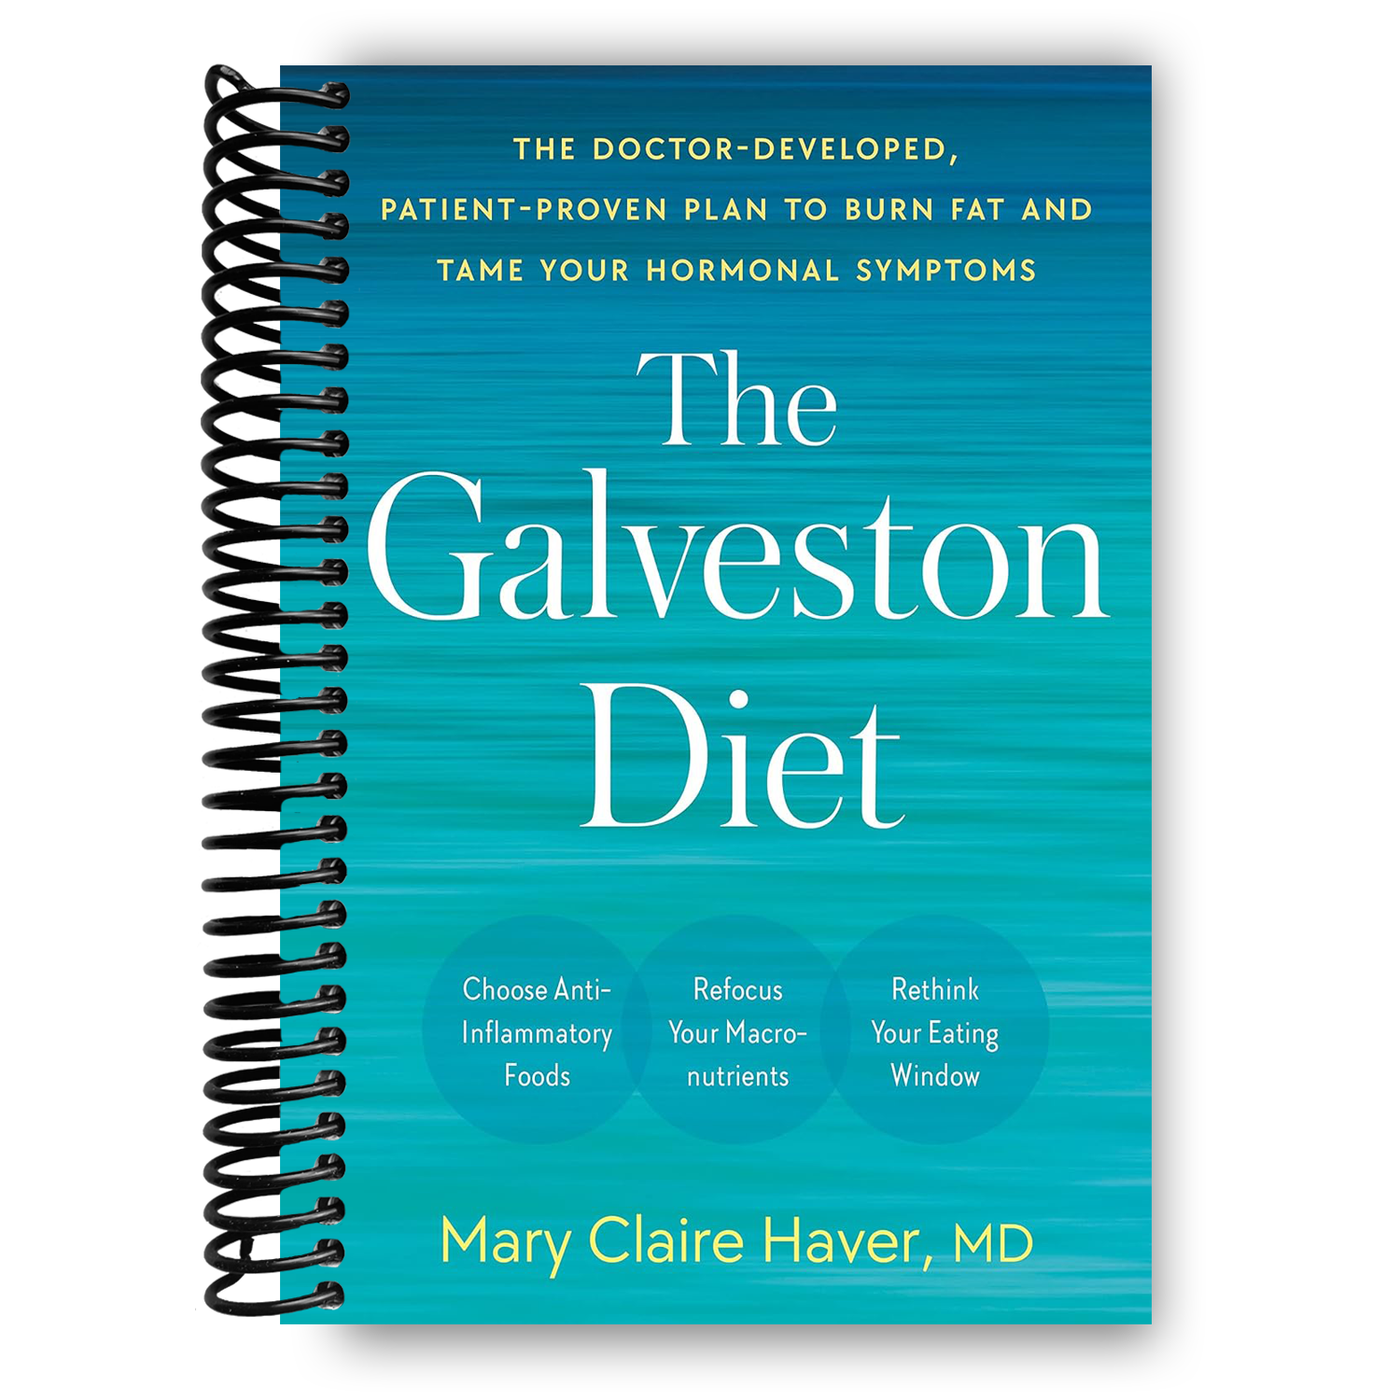 The Galveston Diet: The Doctor-Developed, Patient-Proven Plan to Burn Fat and Tame Your Hormonal Symptoms (Spiral Bound)